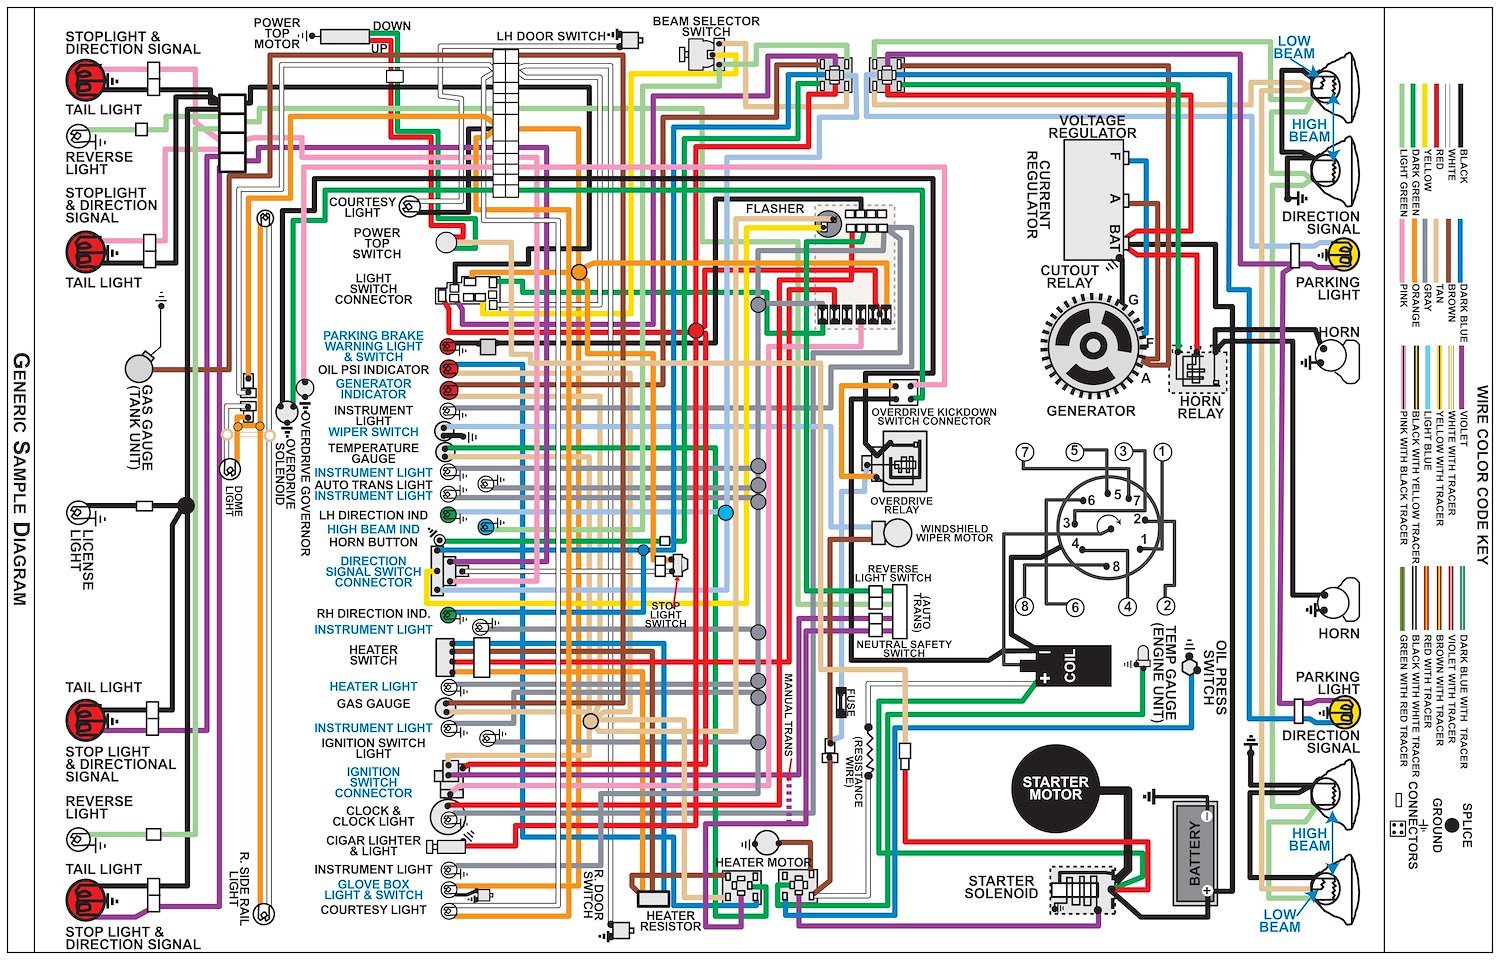 Wiring Diagram for 1970 Dodge Coronet Super Bee